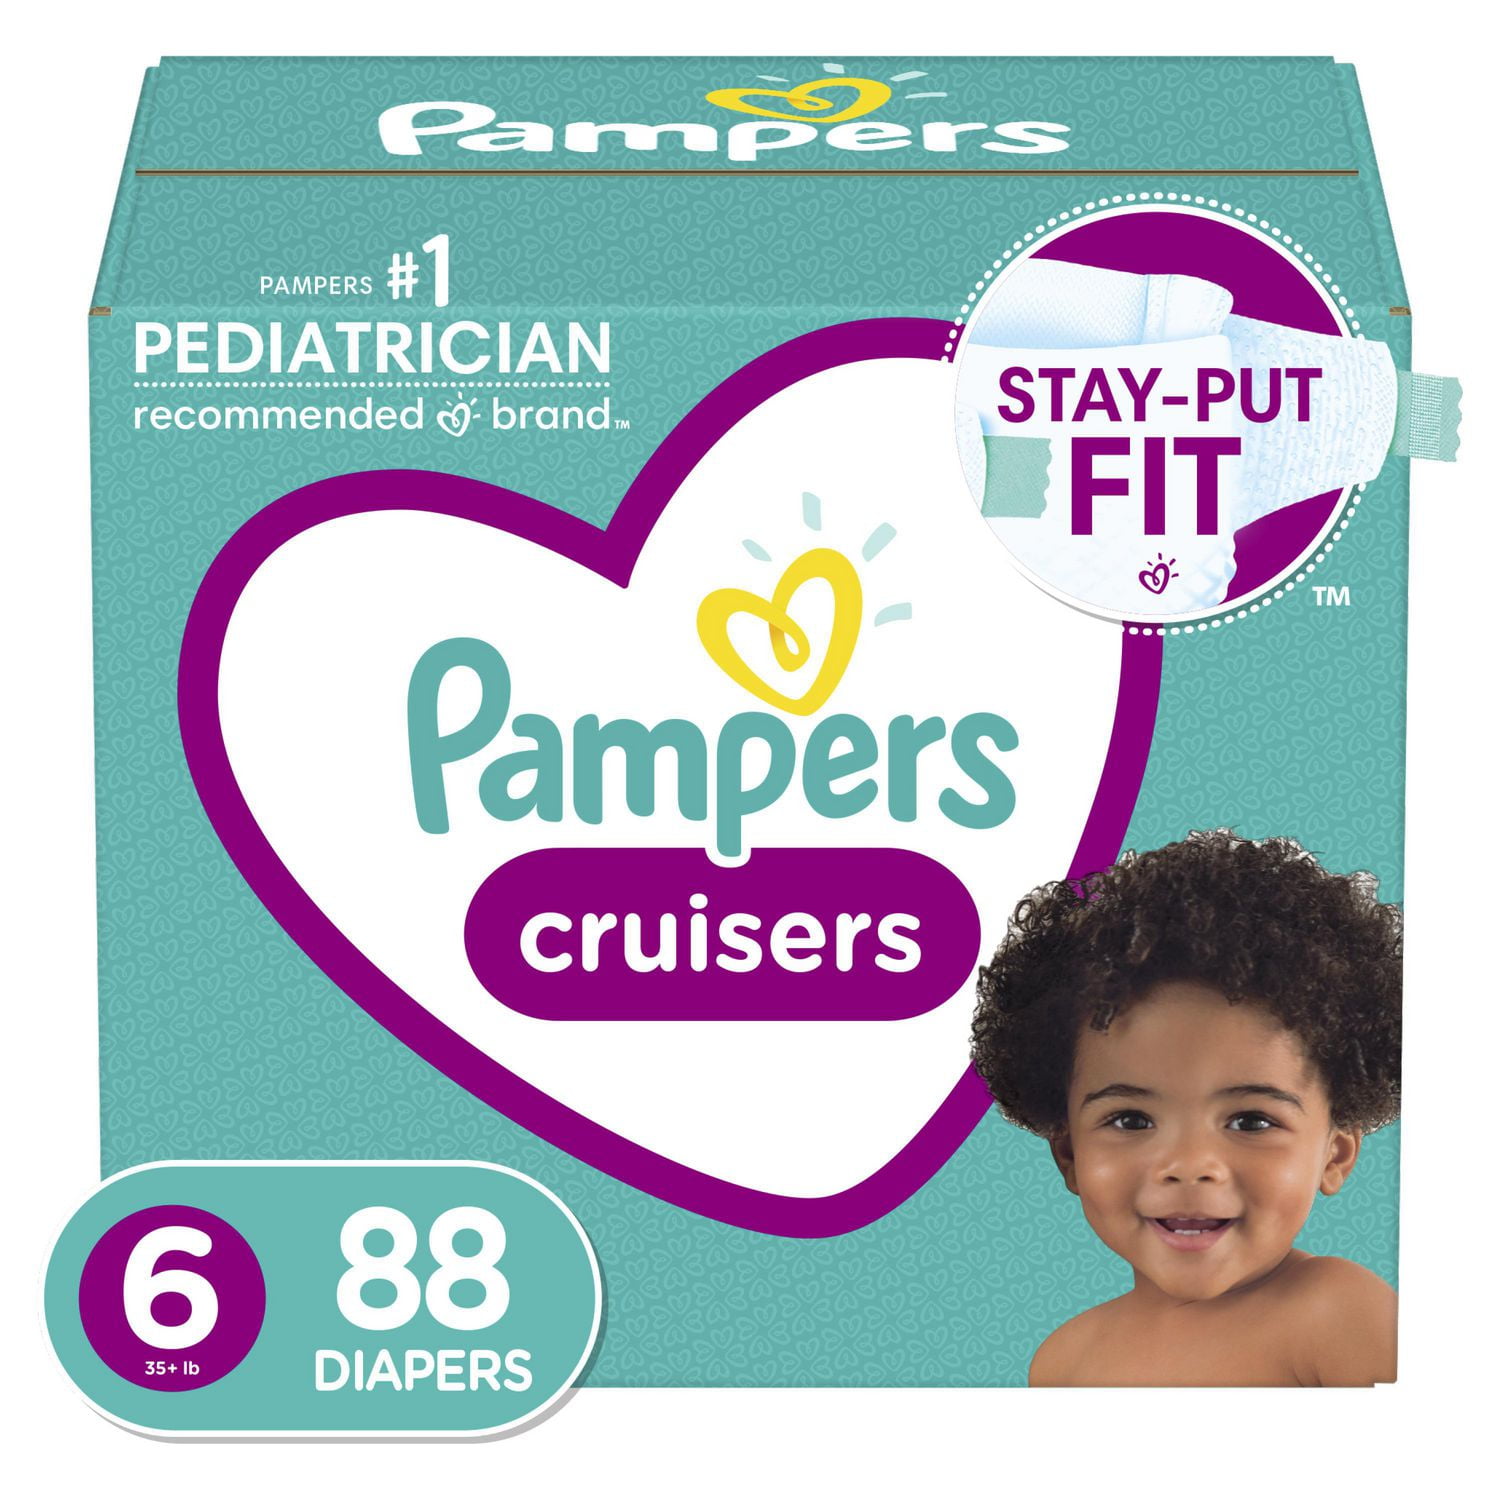 Pampers Cruisers Diapers, Super Econo Pack 